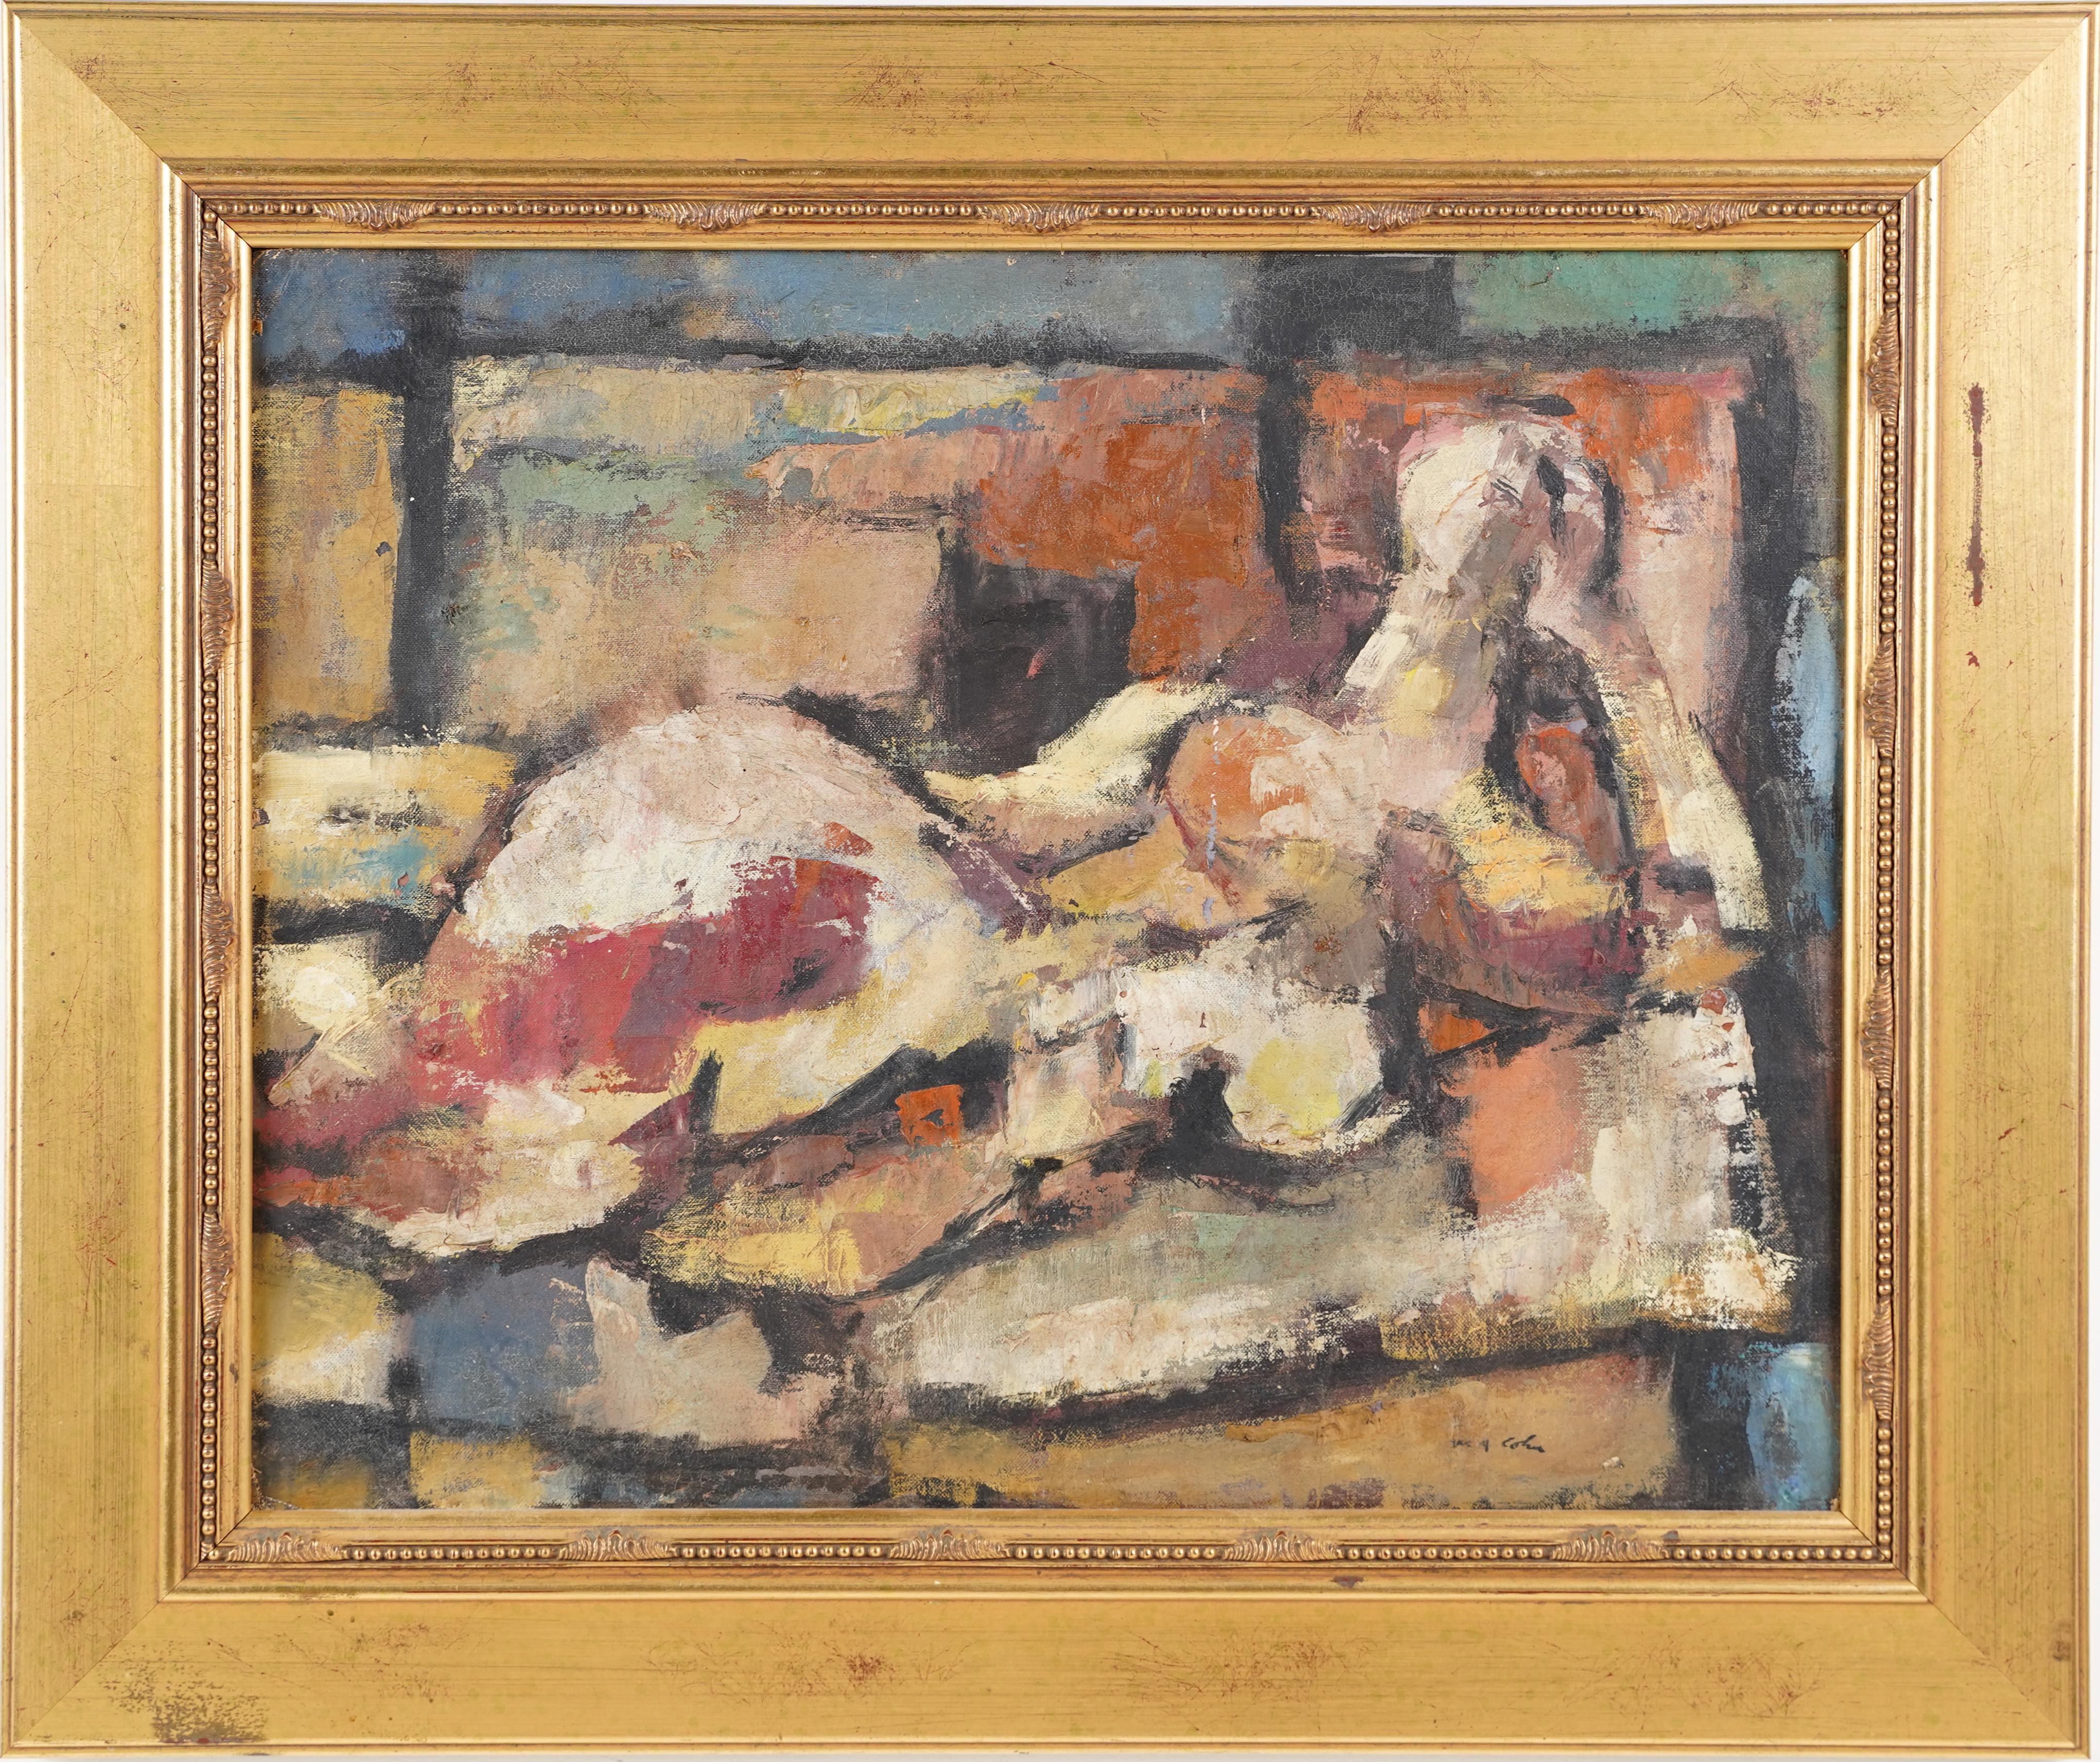 Antique American modernist nude signed oil painting.  Oil on board.  Signed.  Framed.  Image size, 20L x 16H.